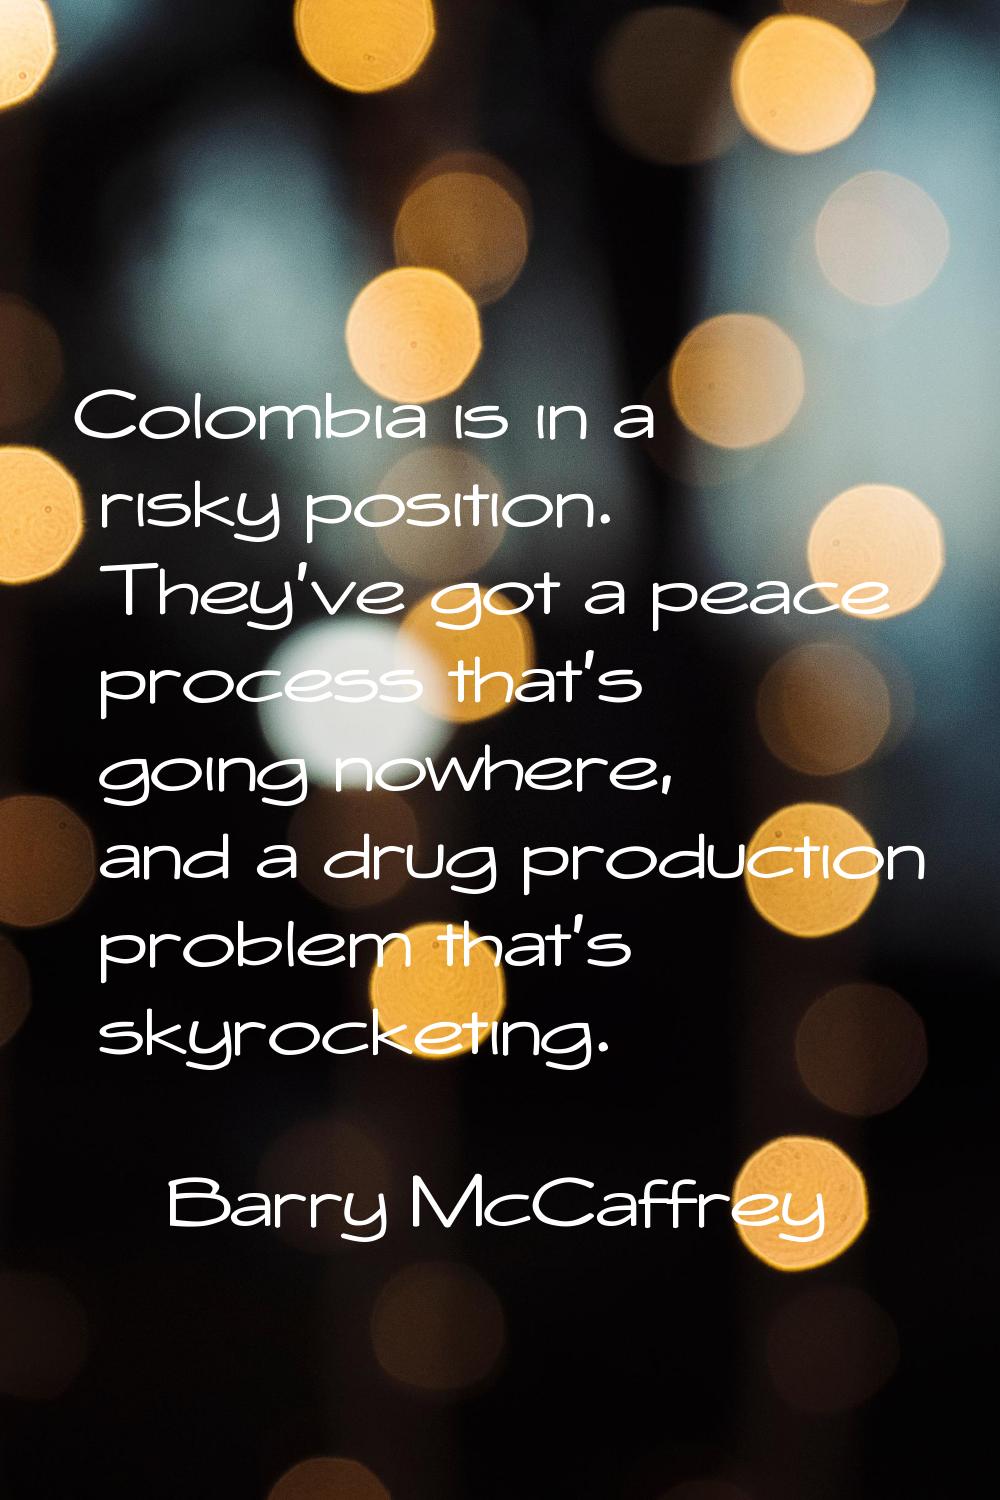 Colombia is in a risky position. They've got a peace process that's going nowhere, and a drug produ